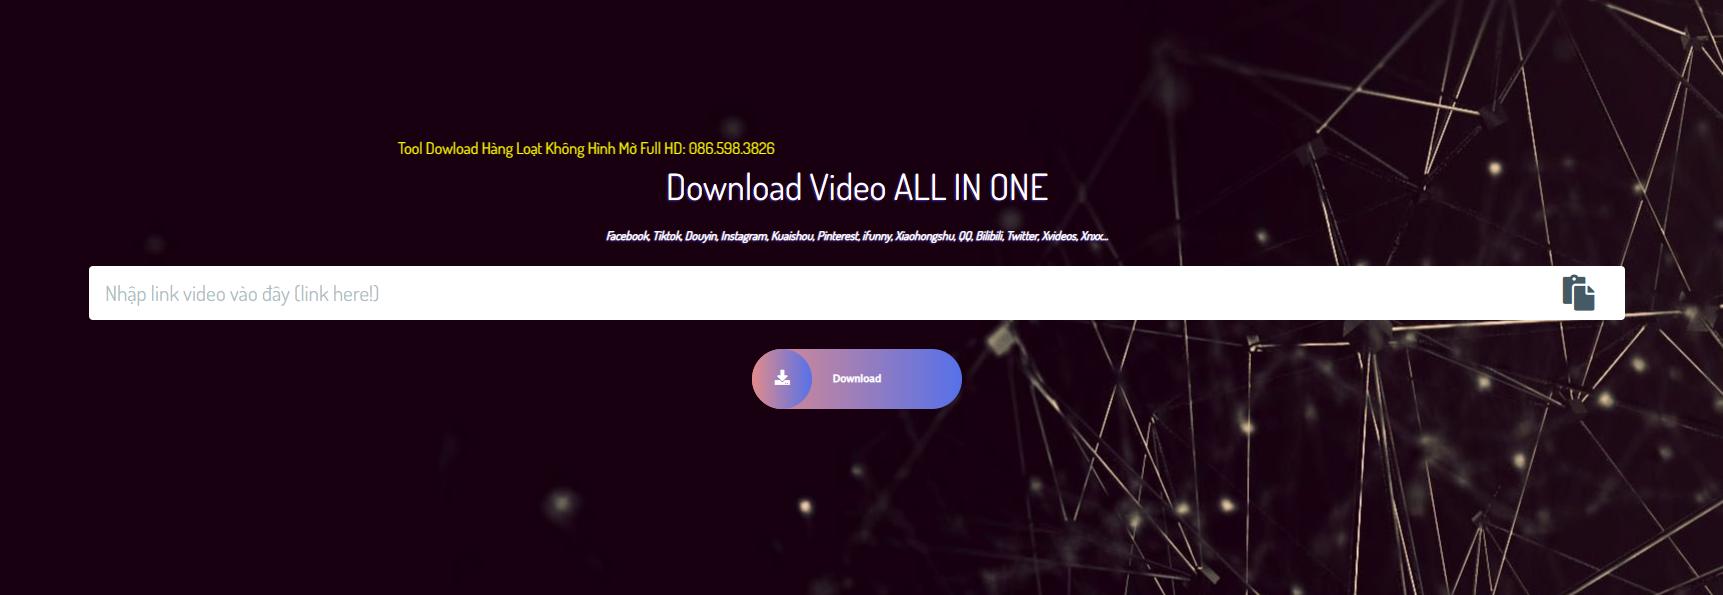 download video all site